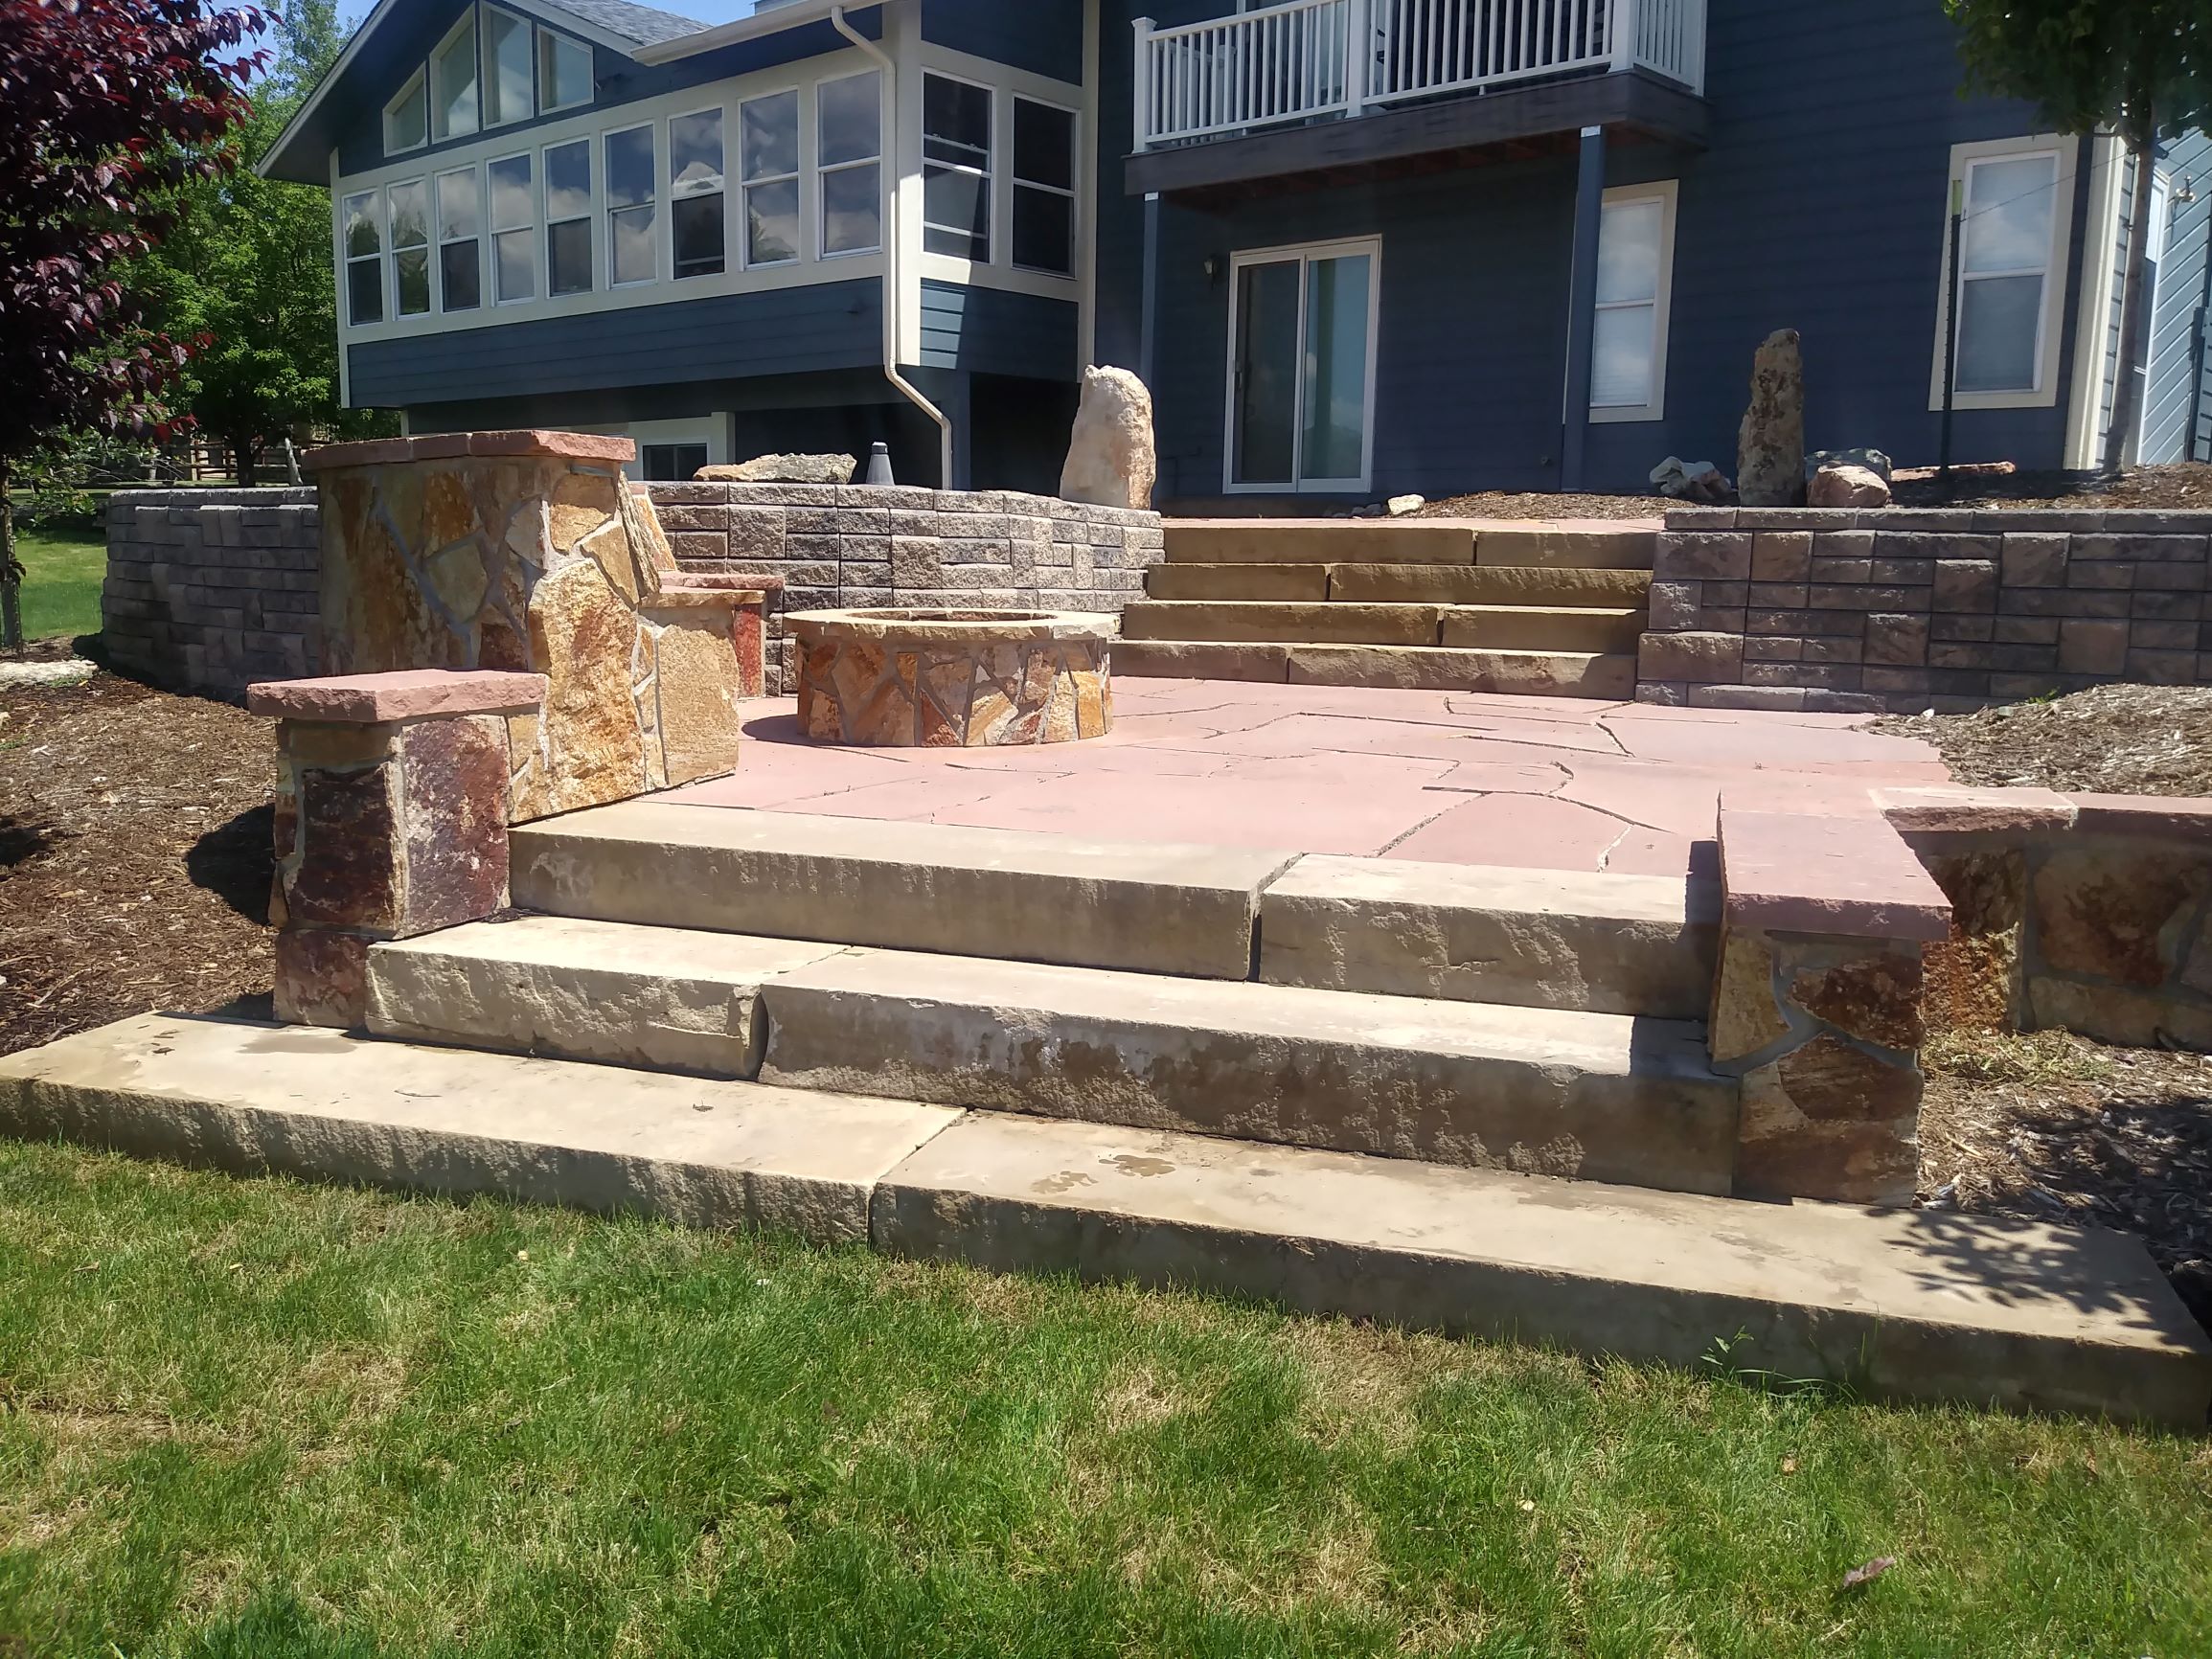 Flat stone steps with flat stone patio and fire pit. Brick edged raised beds topped with mulch.